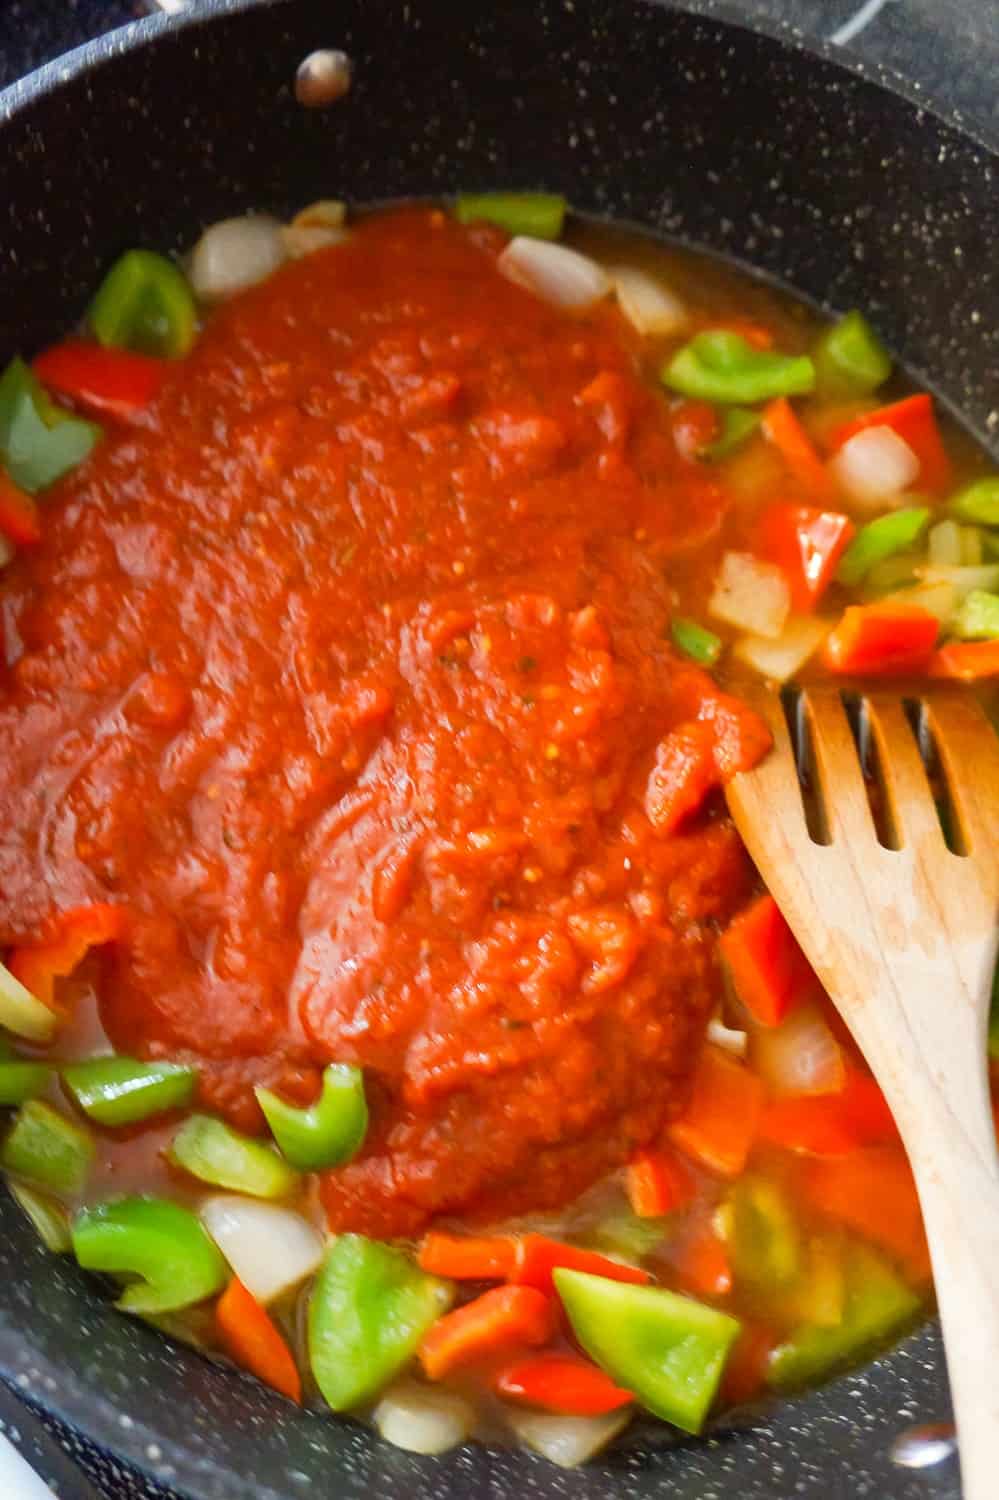 marinara sauce on top diced bell peppers and onions